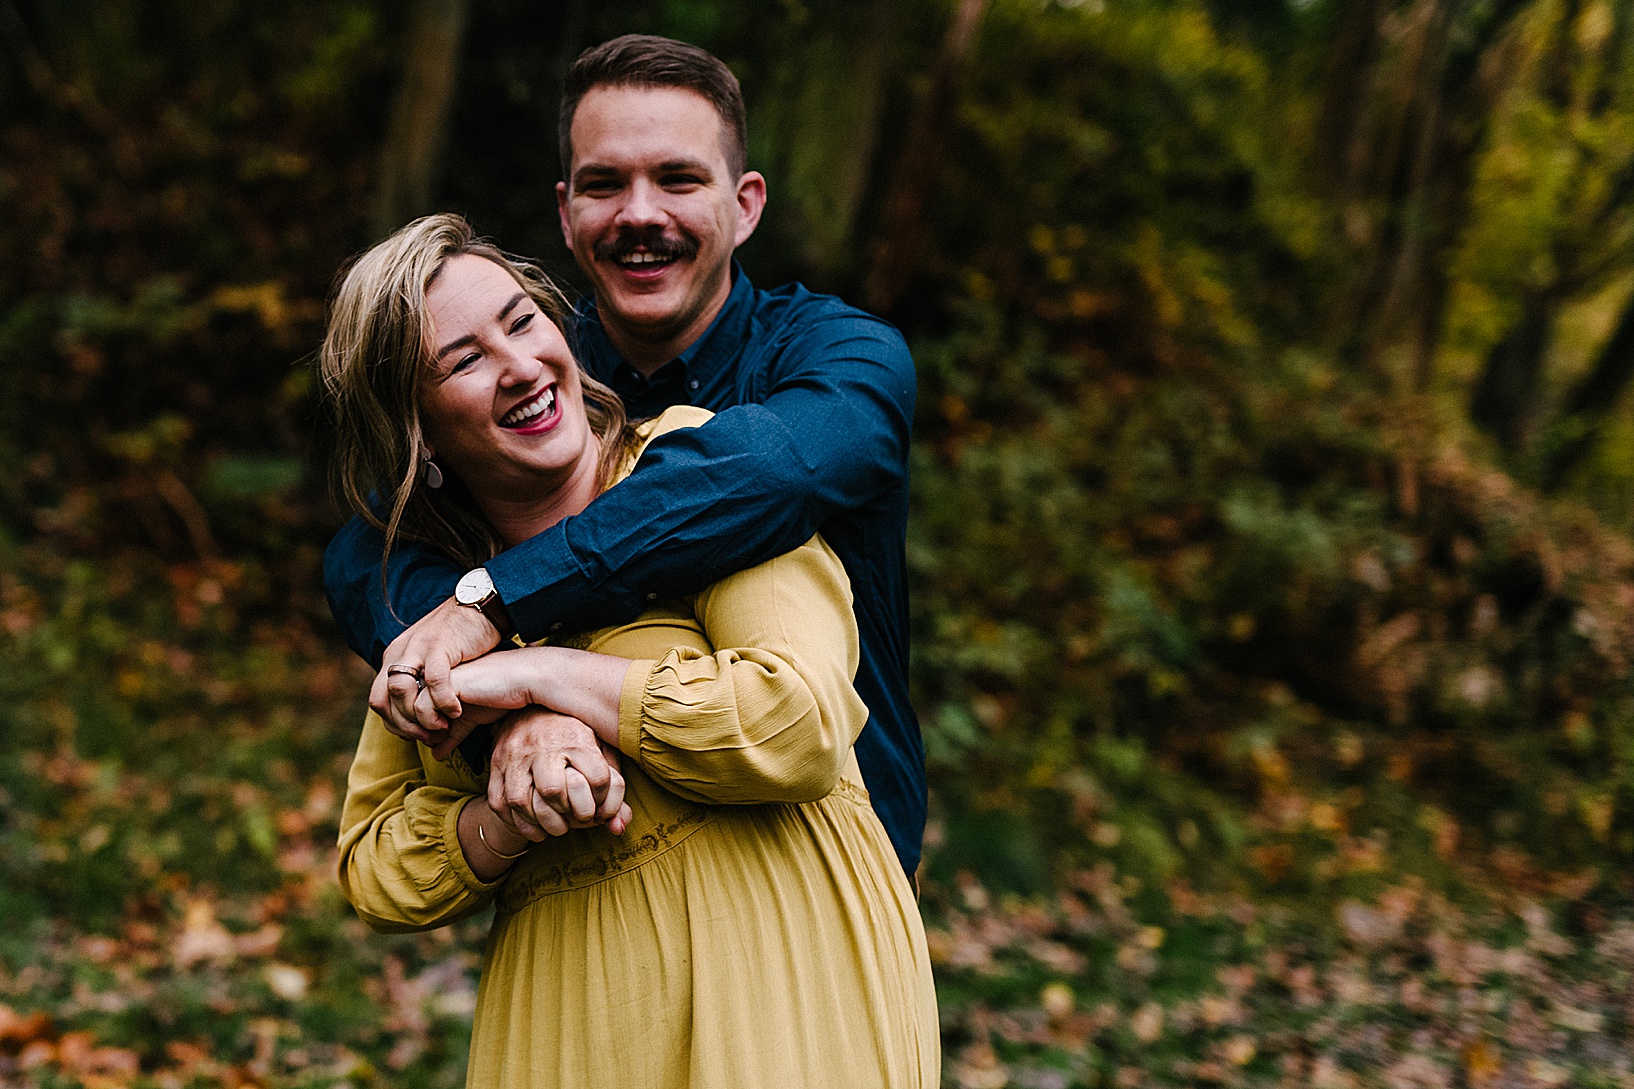 Blonde woman in mustard colored dress laughs and smiles while her mustached husband hugs her from behind with their fingers interlocked in front of them.